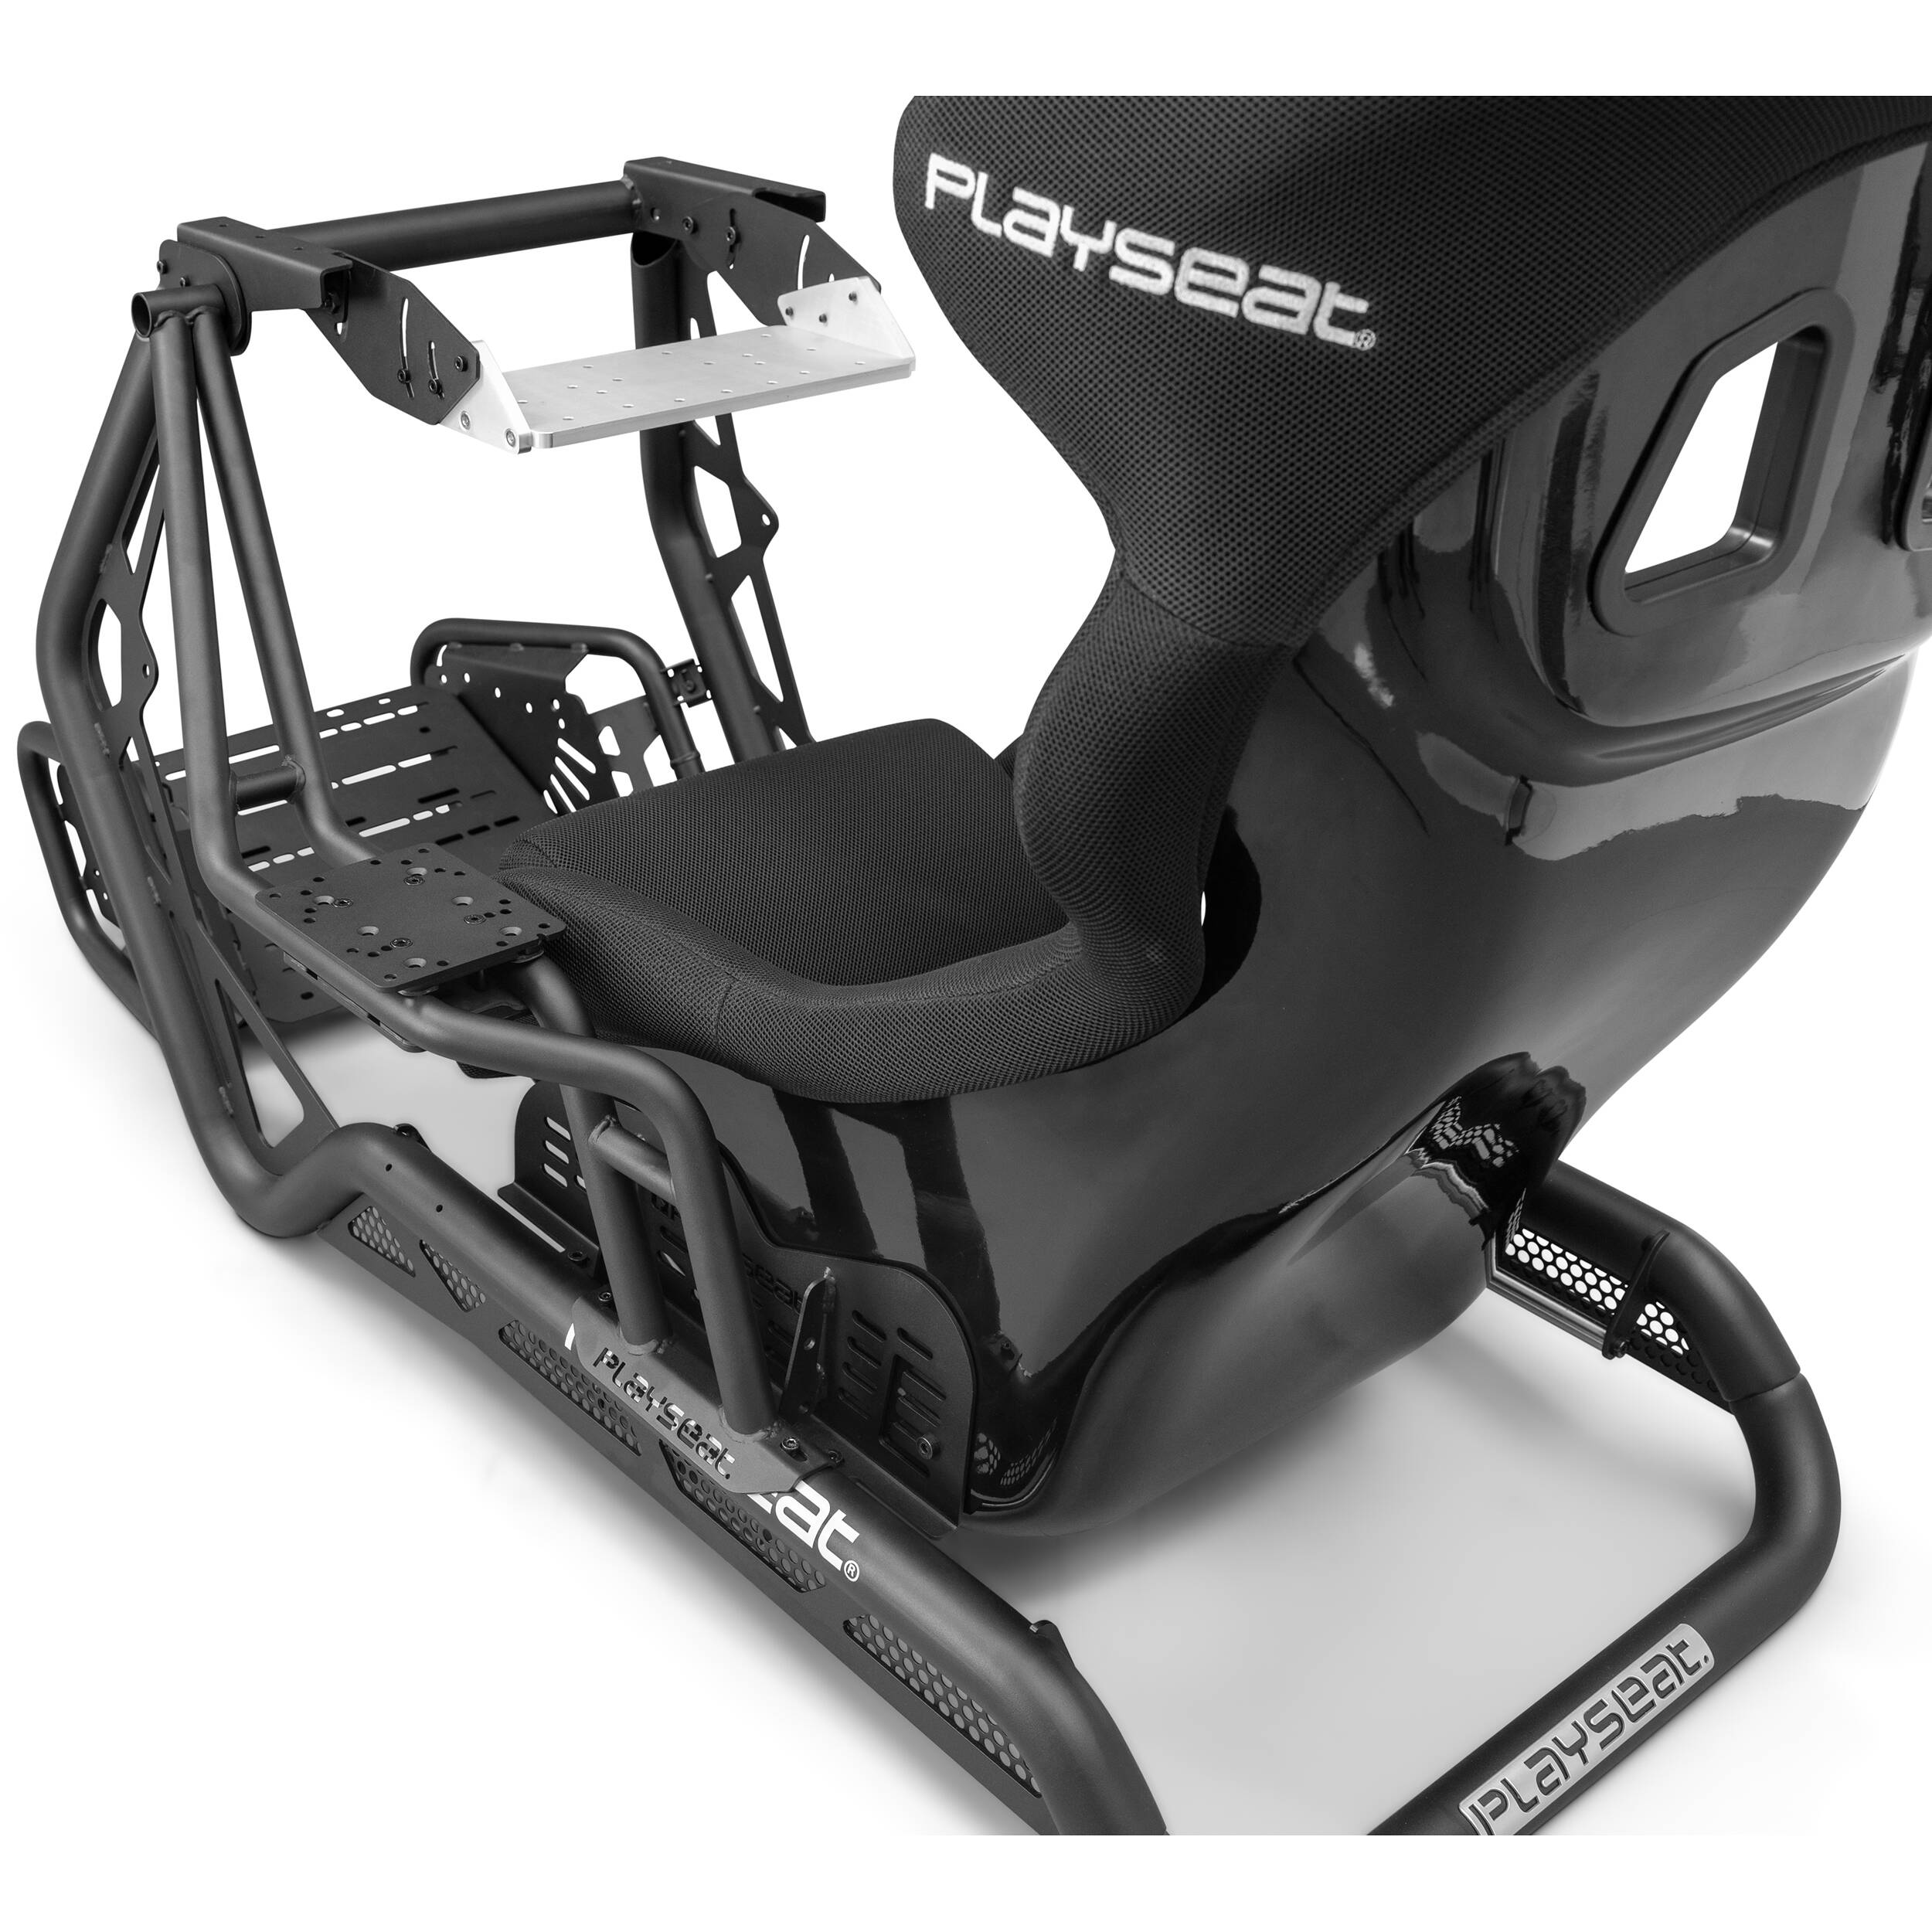 Playseat R.AC.00252 Sensation PRO High Quality Cockpit Extension Sim Platform to Mount Handbrakes or Gear Shifters Next to Your Seat, Left